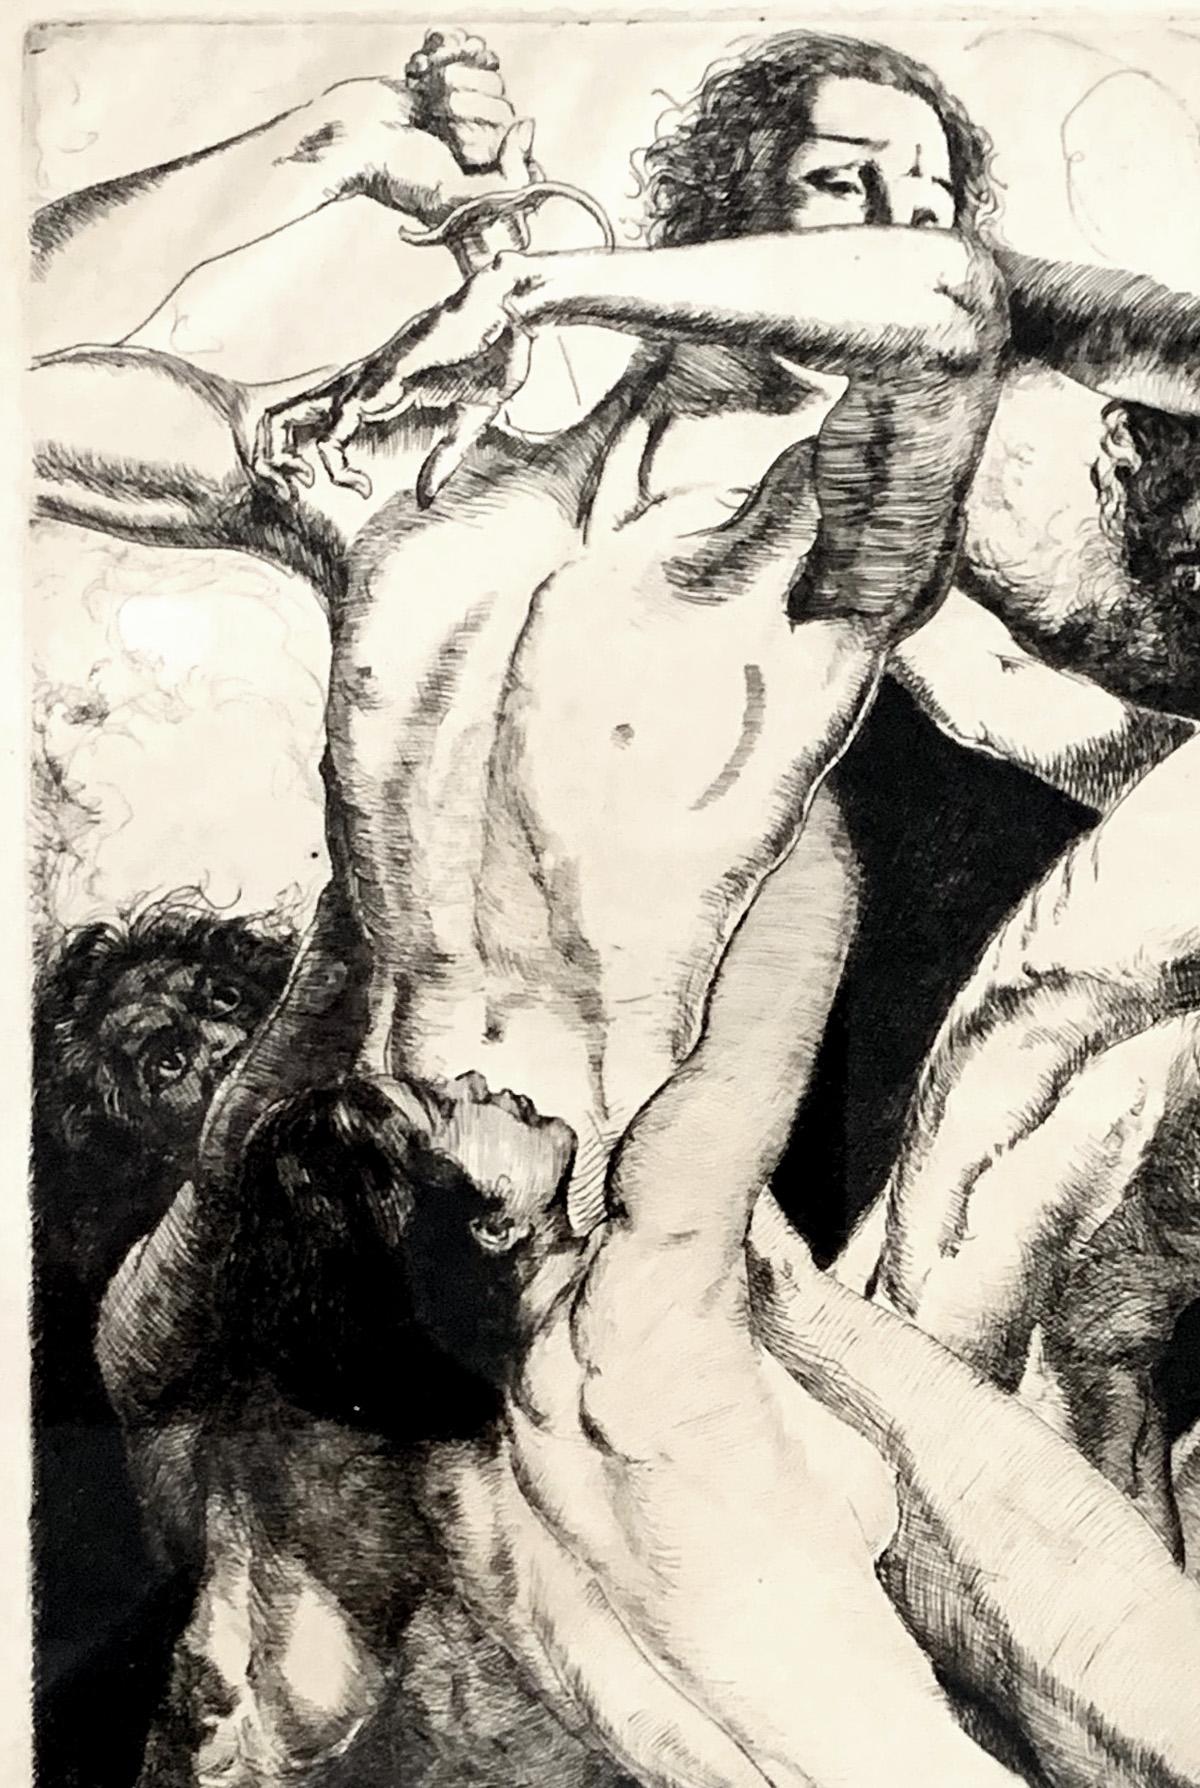 Depicting a complex interplay of lithe nude figures in struggle, the upper male figure holding a large sword aloft, this rare print was made by the famed artist and illustrator, Willy Pogany, in the 1920s or 1930s. Pogany was born and educated in